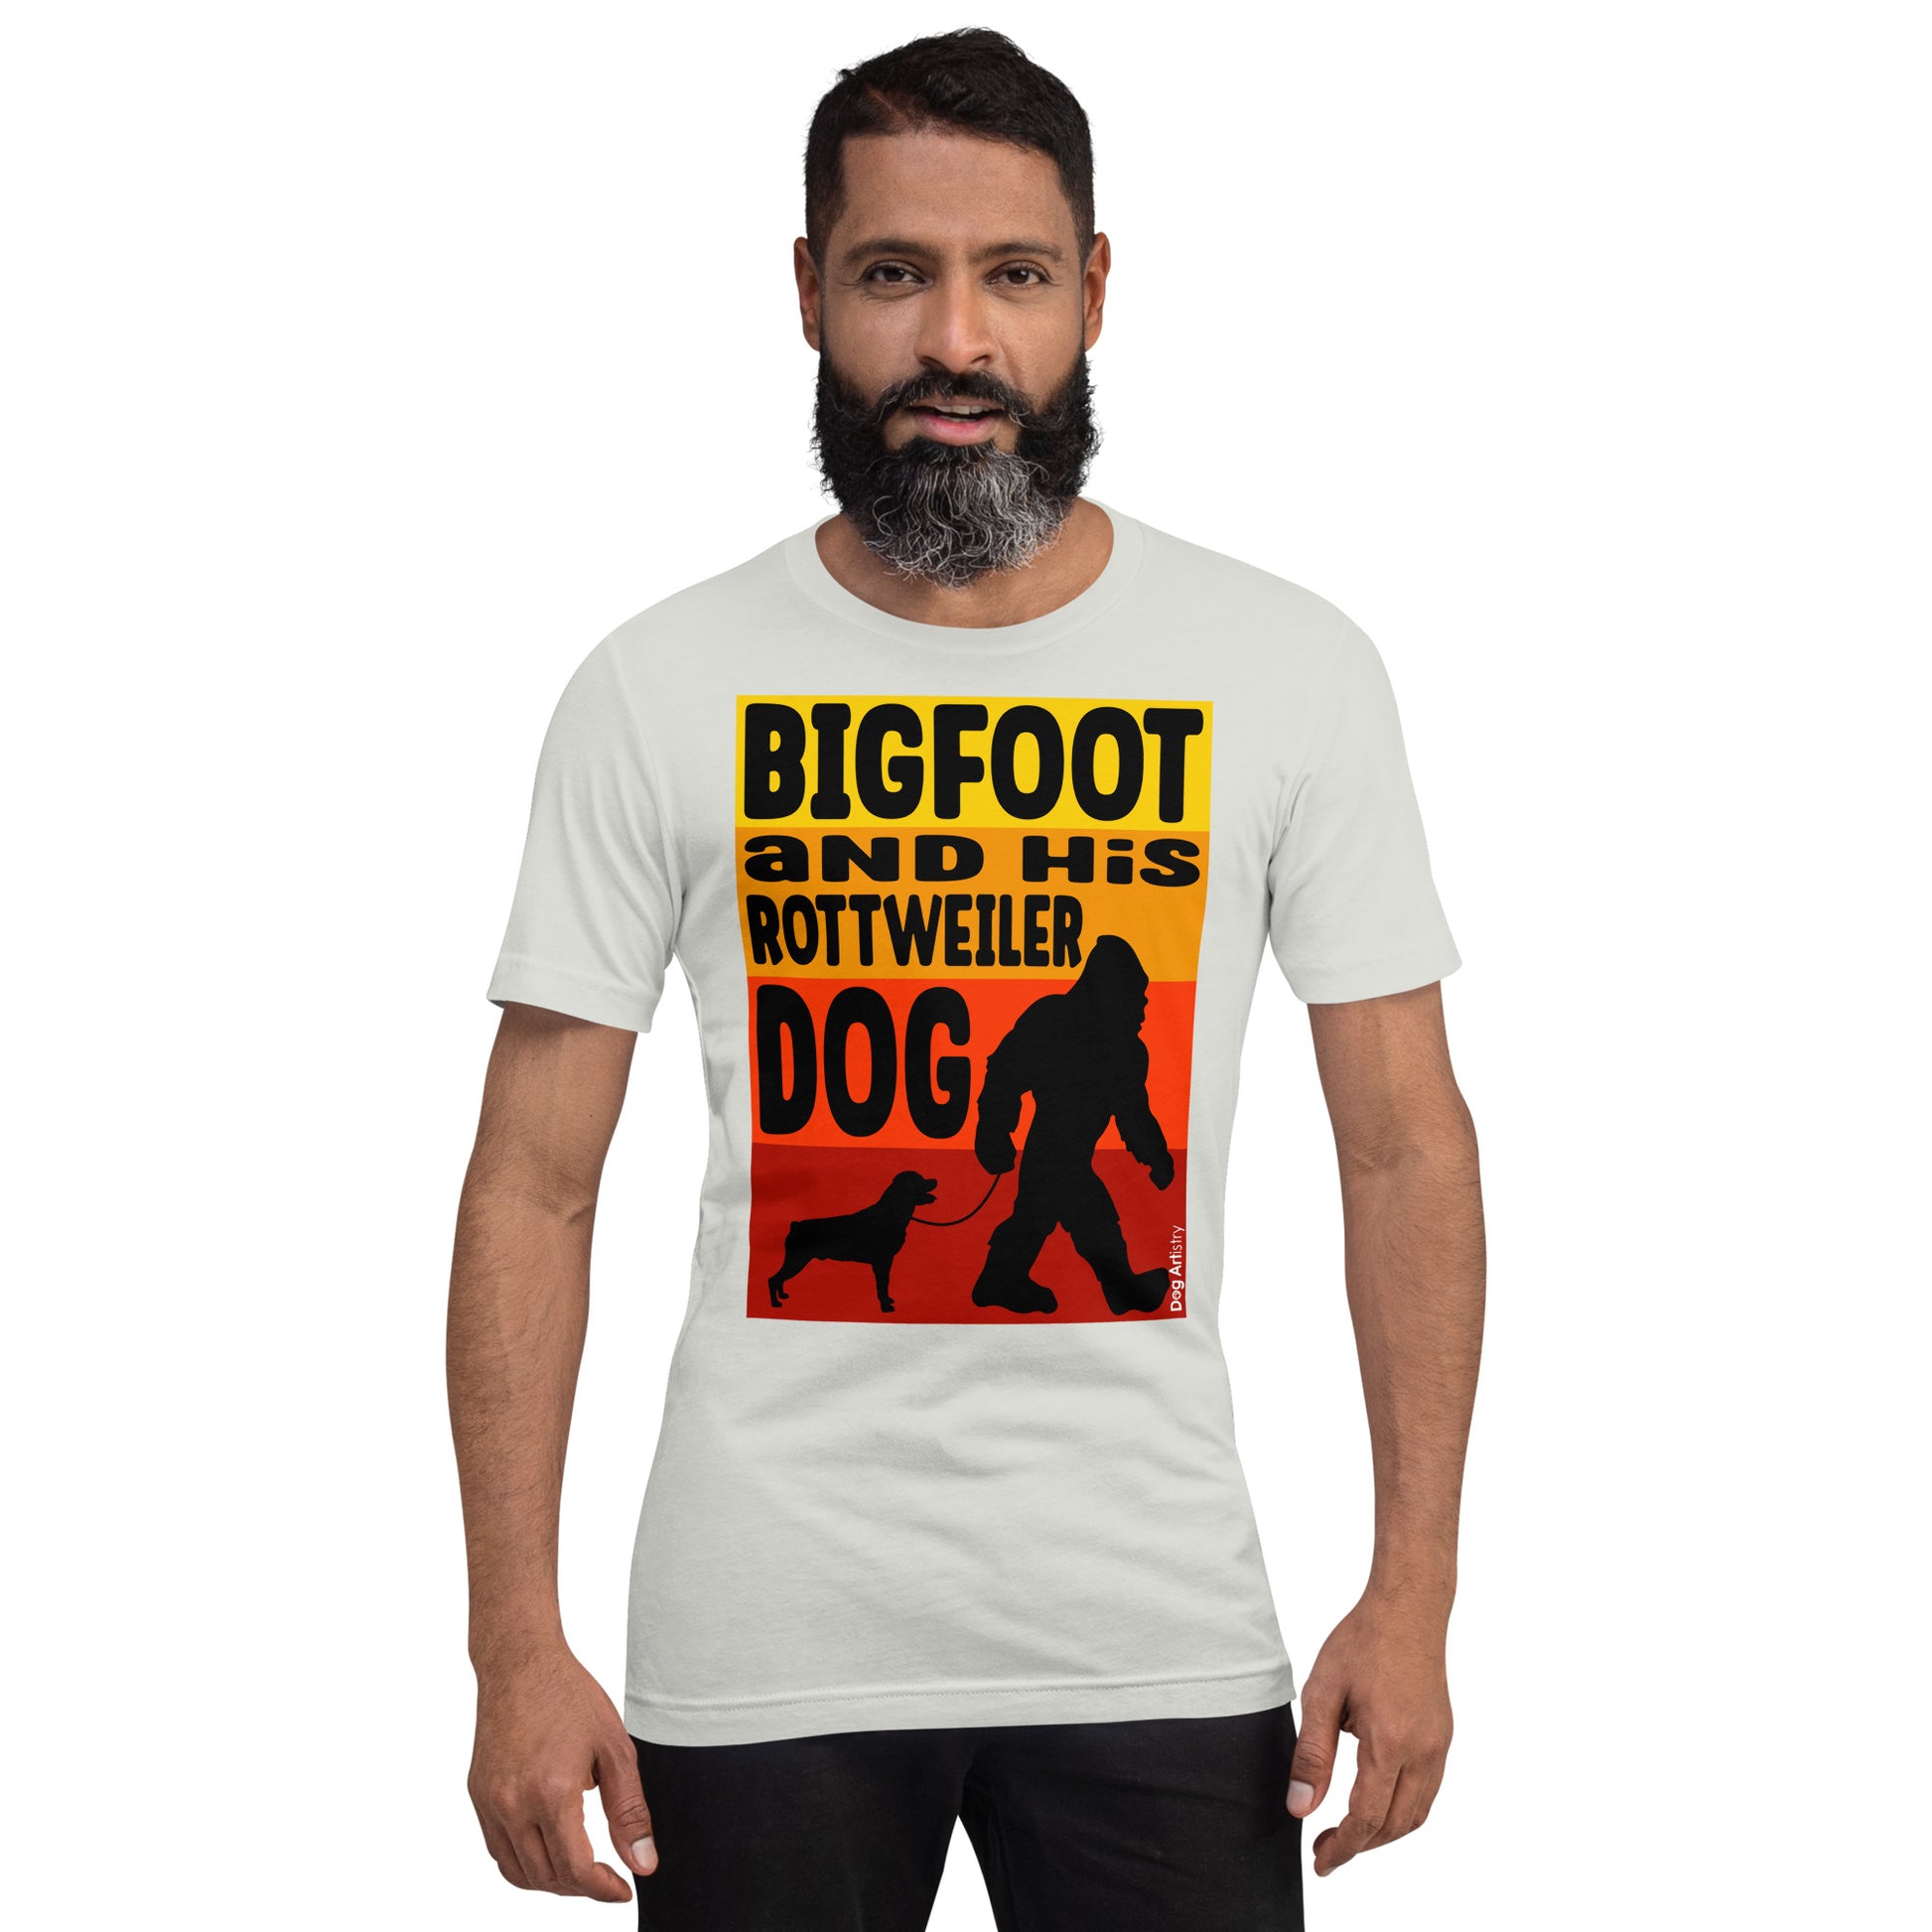 Bigfoot and his Rottweiler unisex silver t-shirt by Dog Artistry.